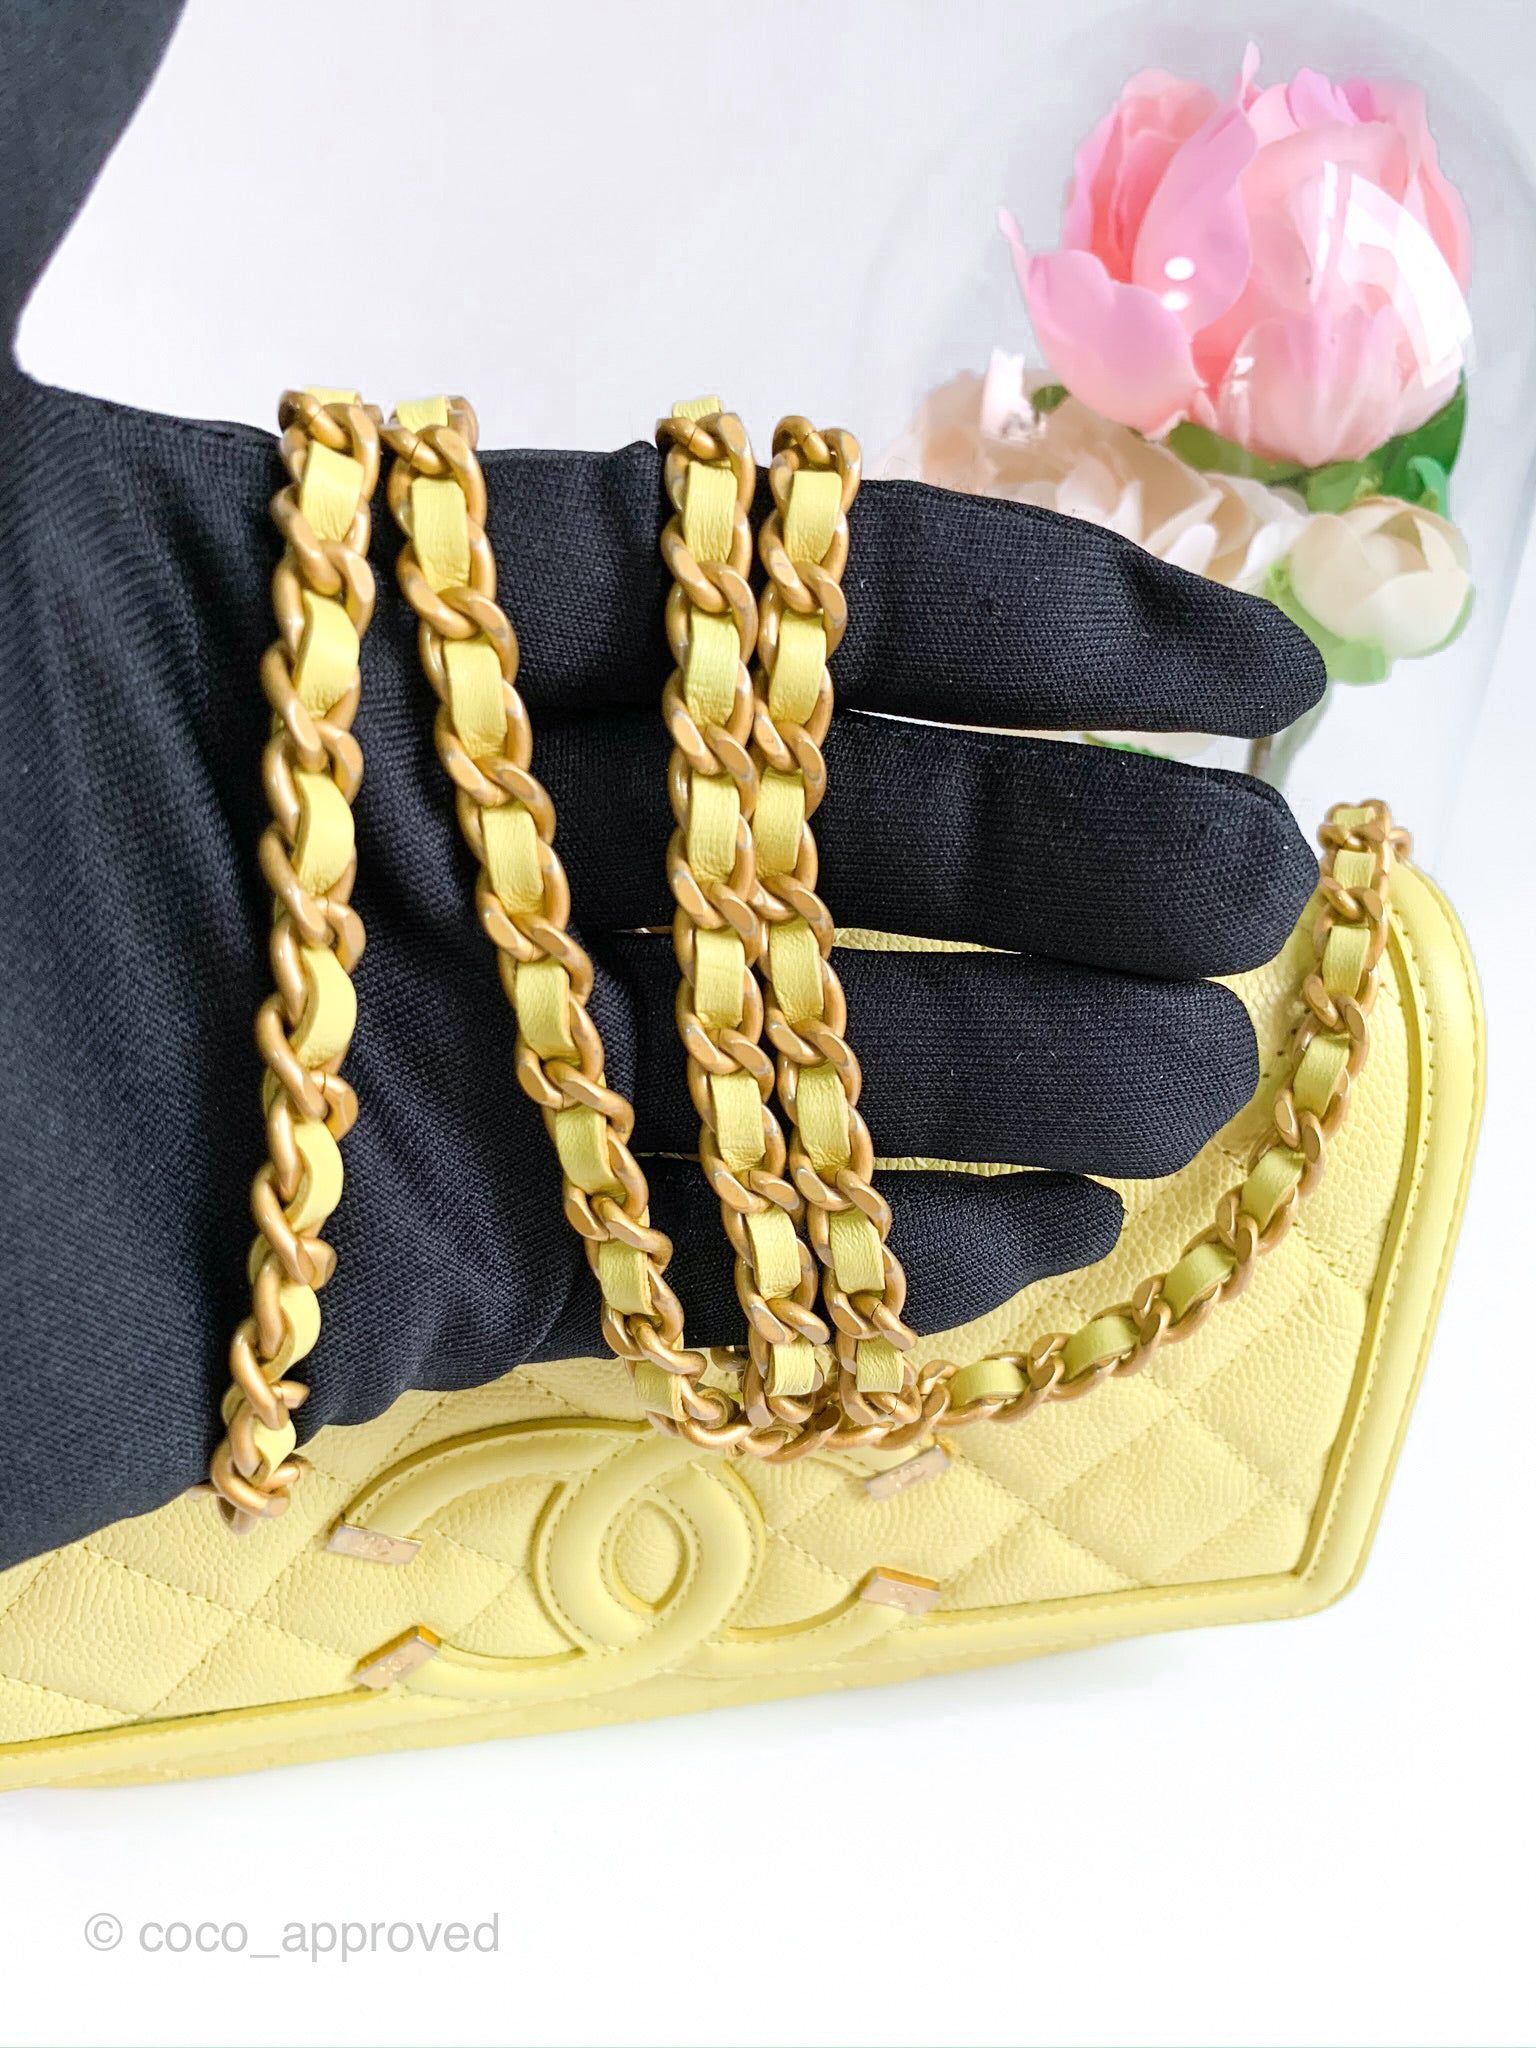 chanel clutch patent leather